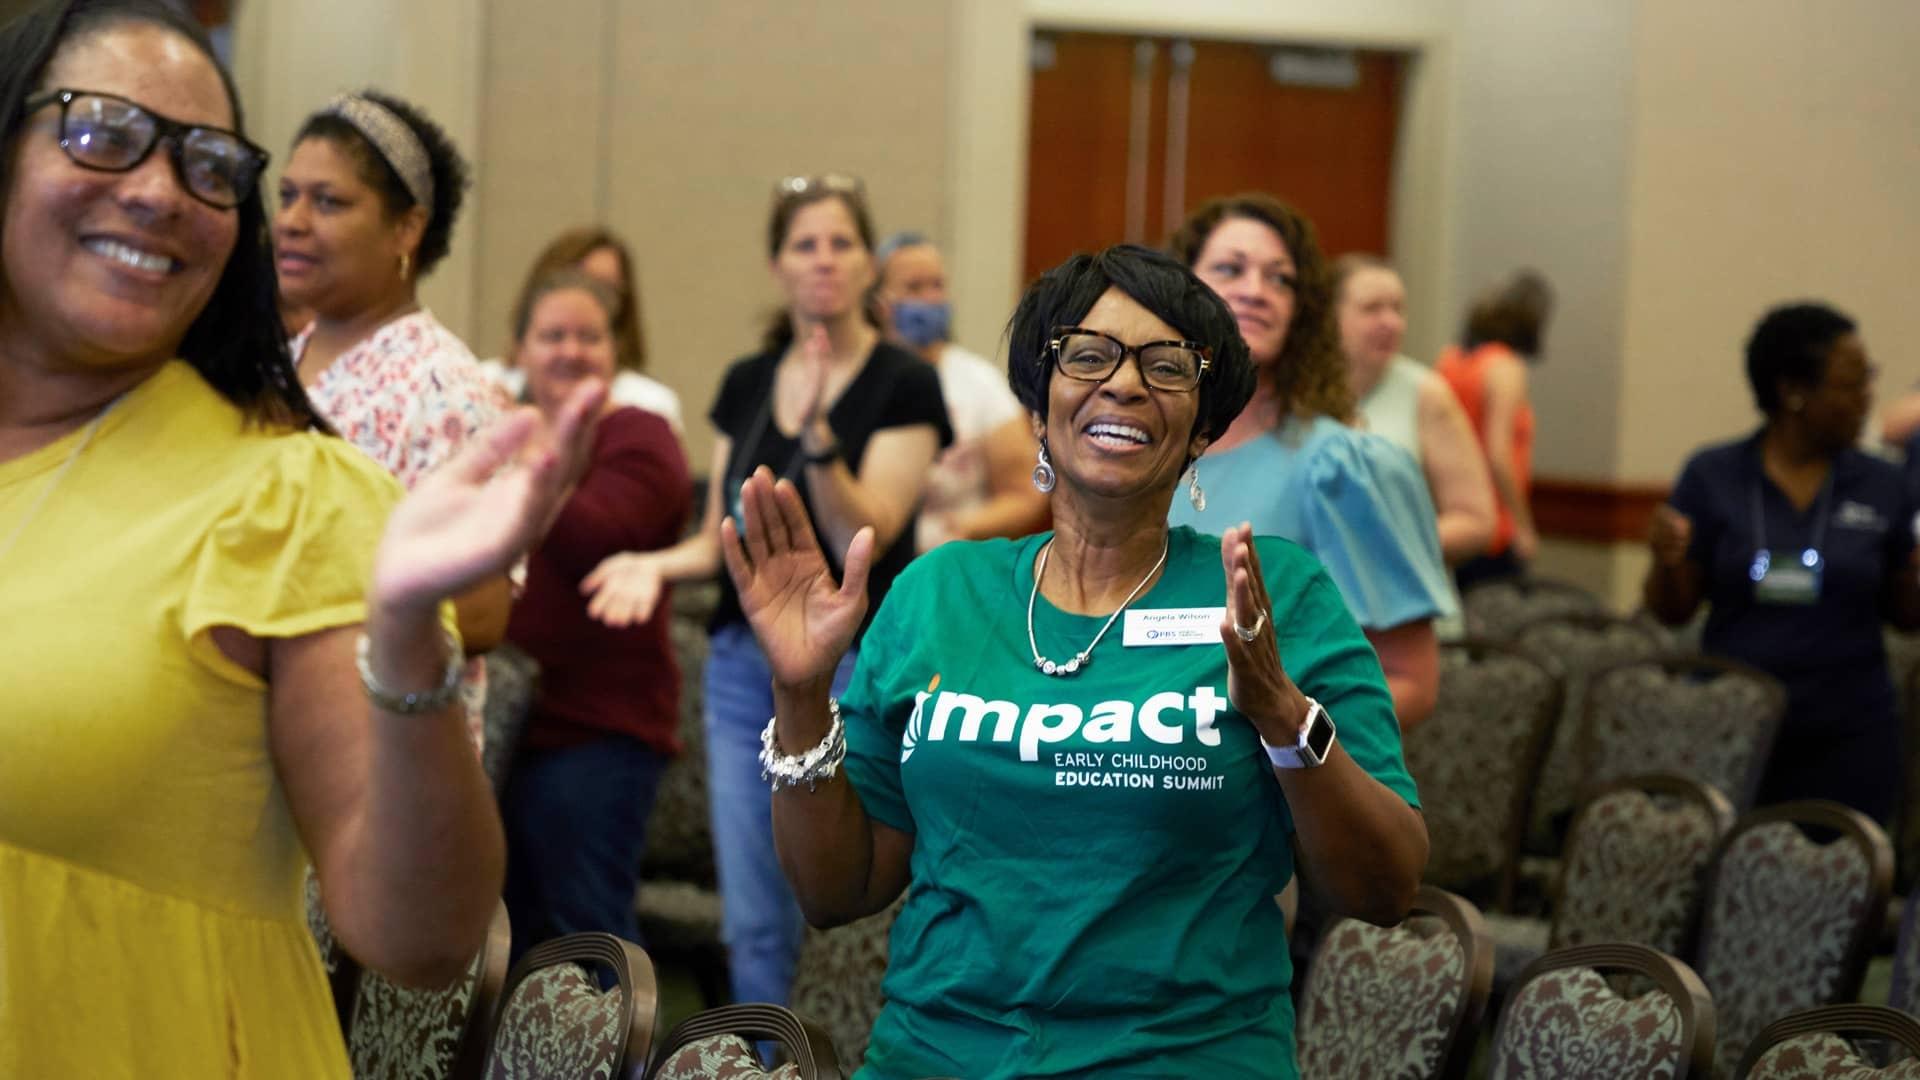 Attendees at the 2022 Impact Summit stand in the ballroom during the opening session